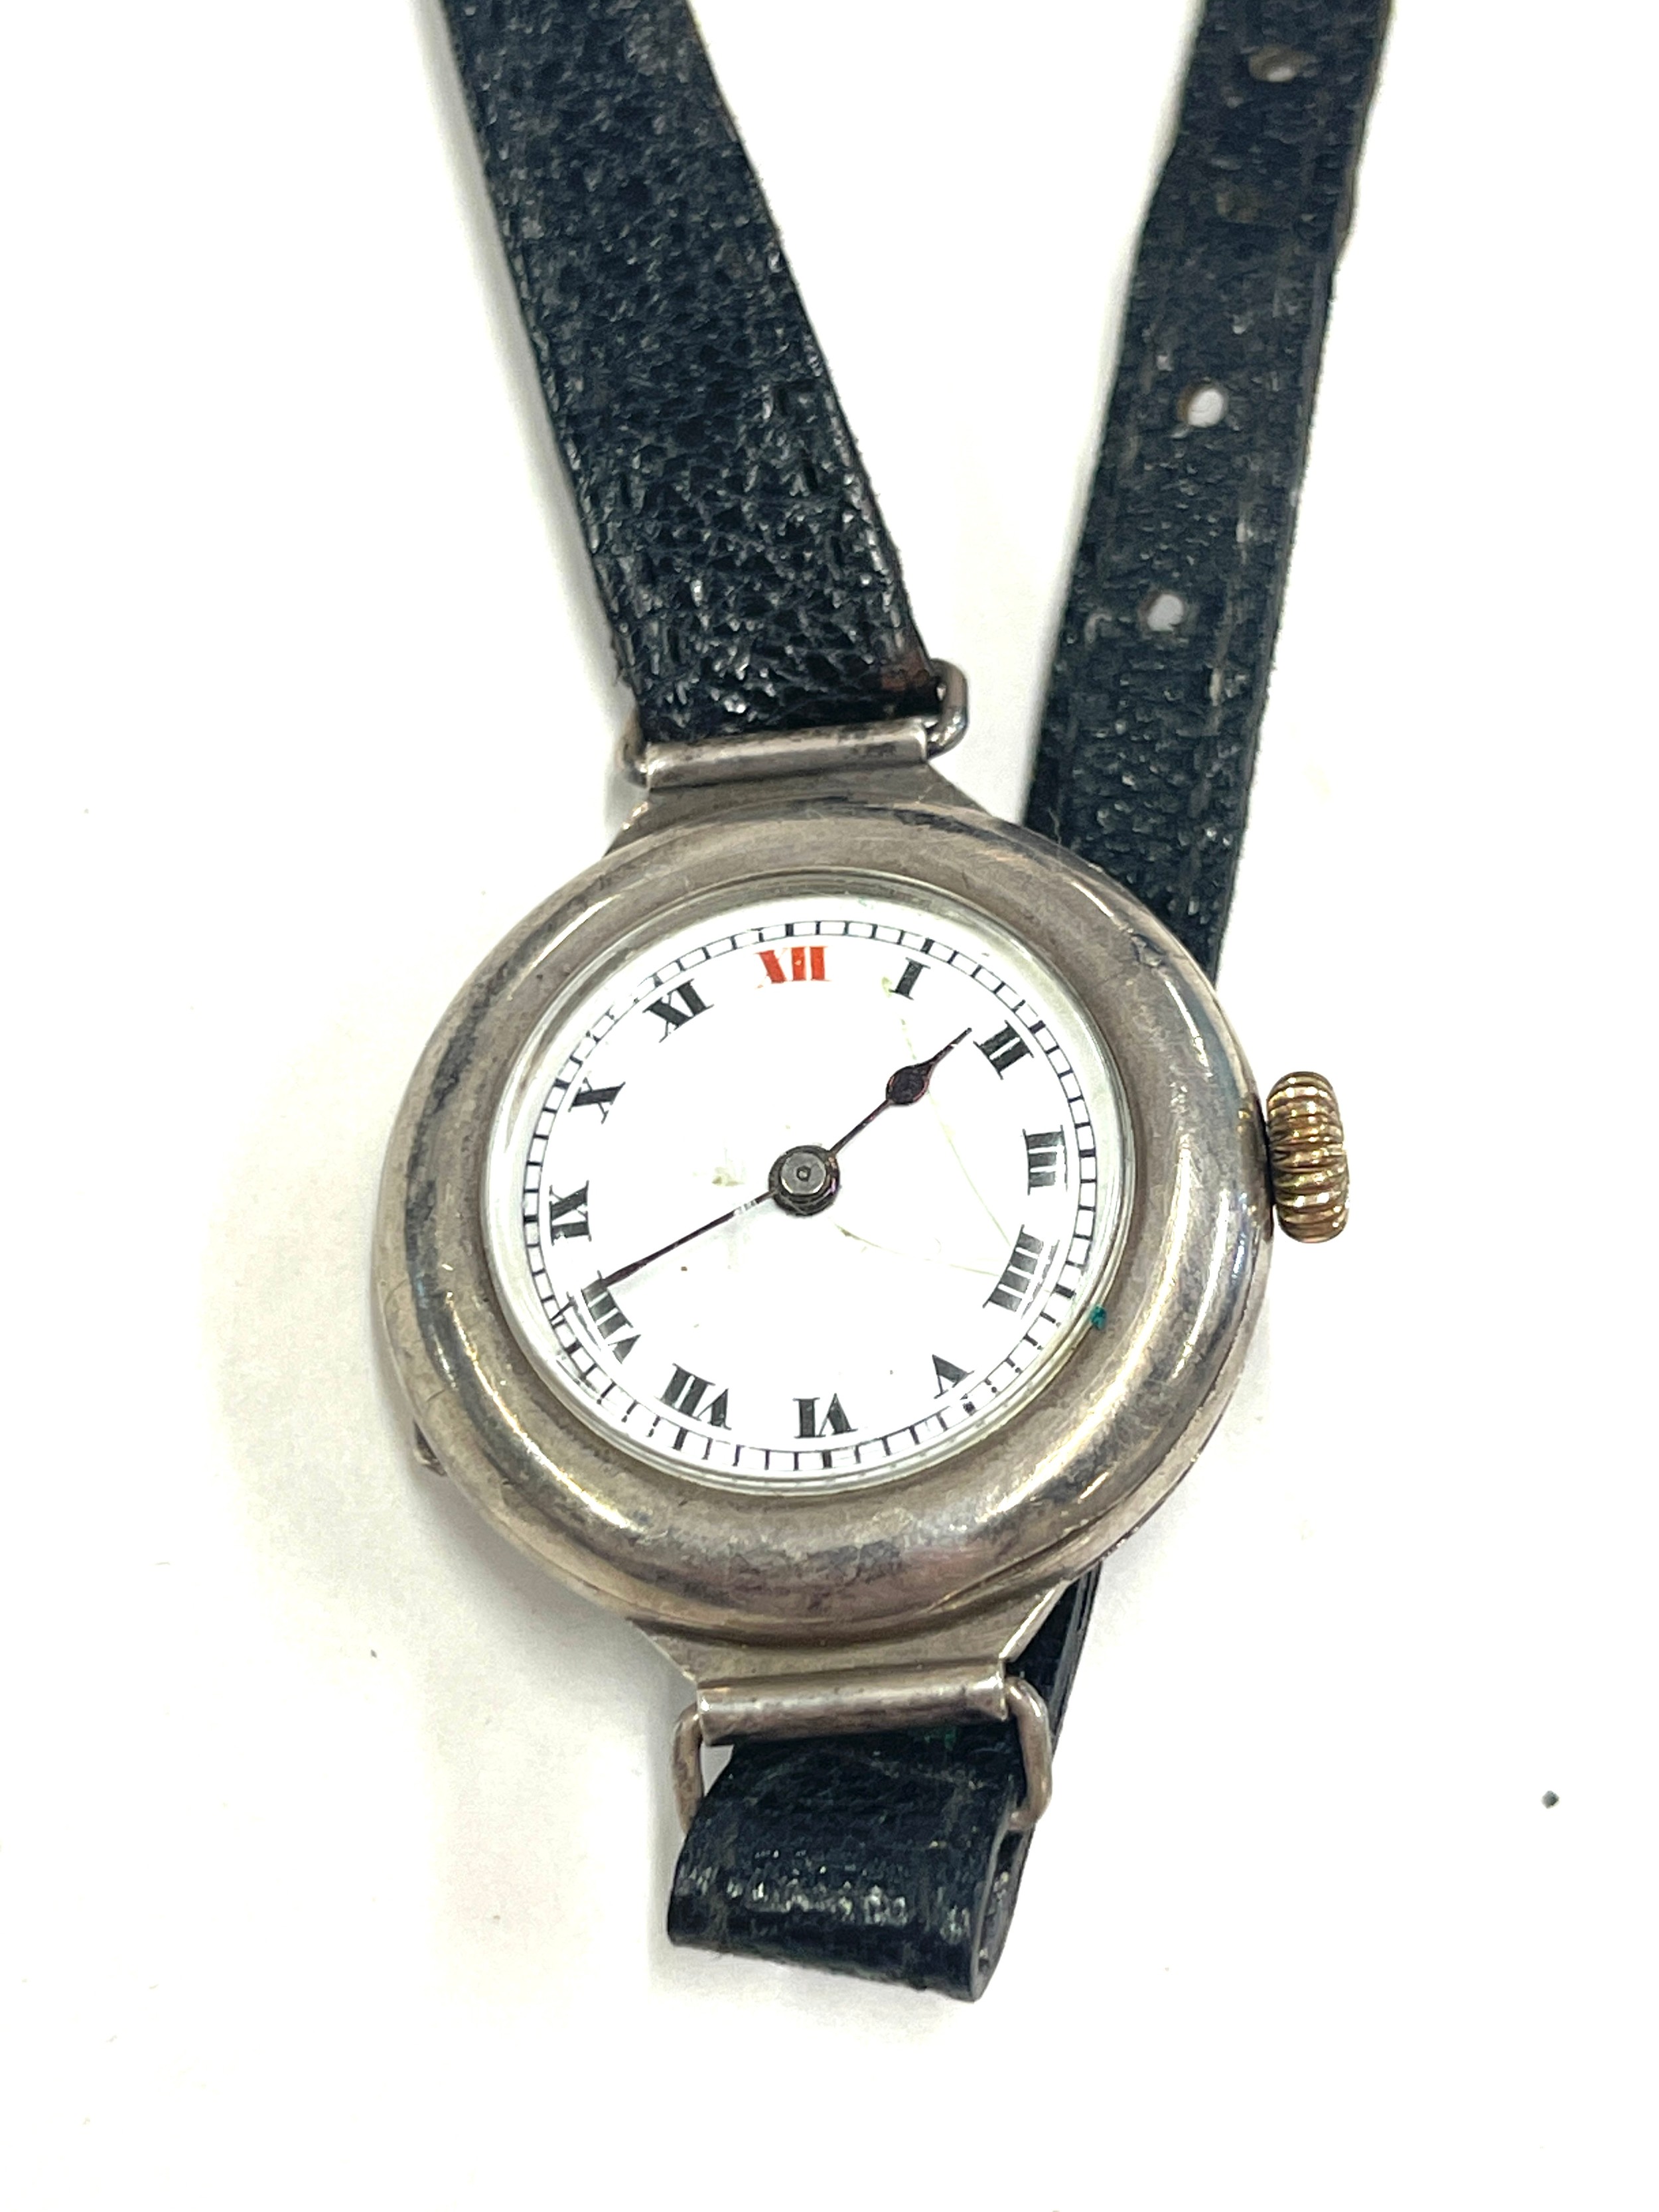 WW1 military style trench watch by Buren, untested